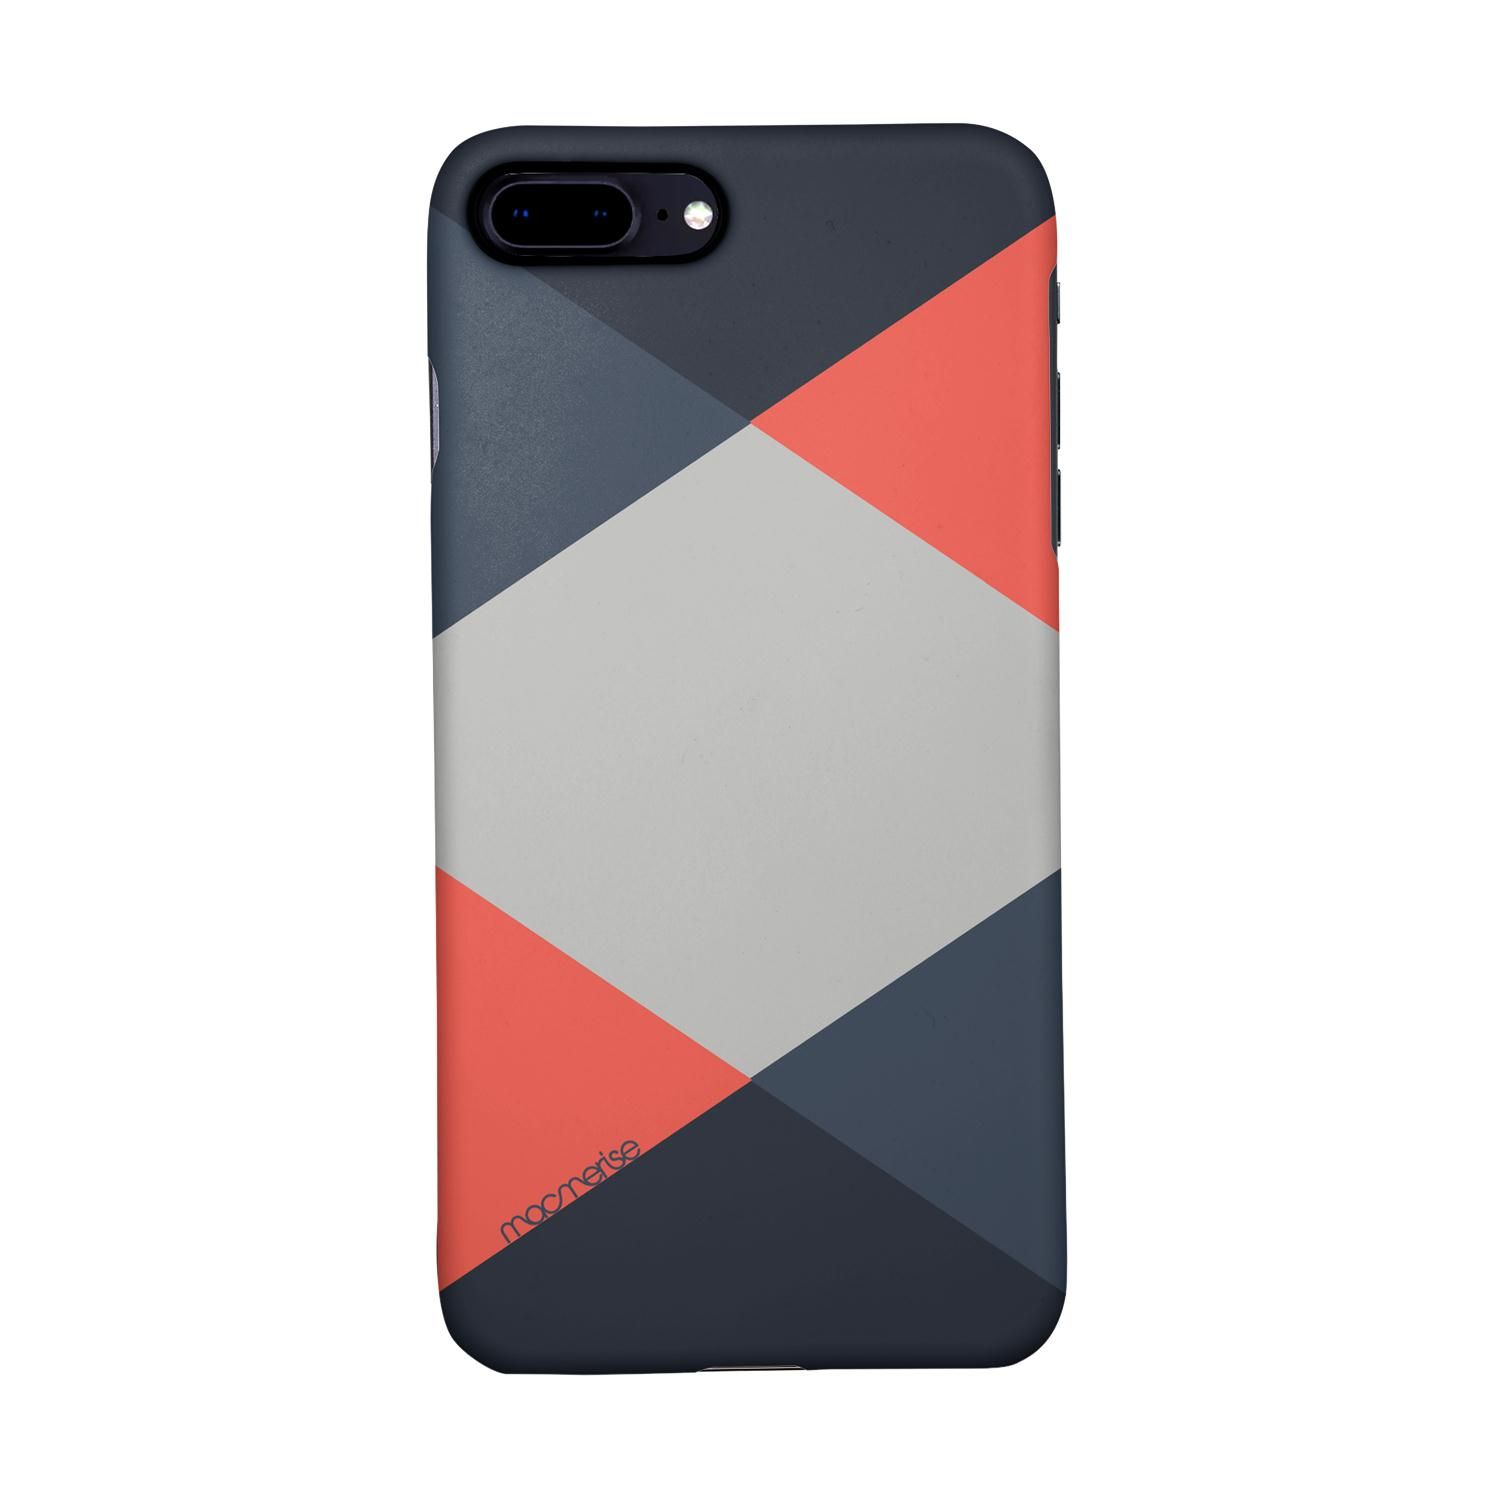 Buy Criss Cross Coral - Sleek Phone Case for iPhone 8 Plus Online